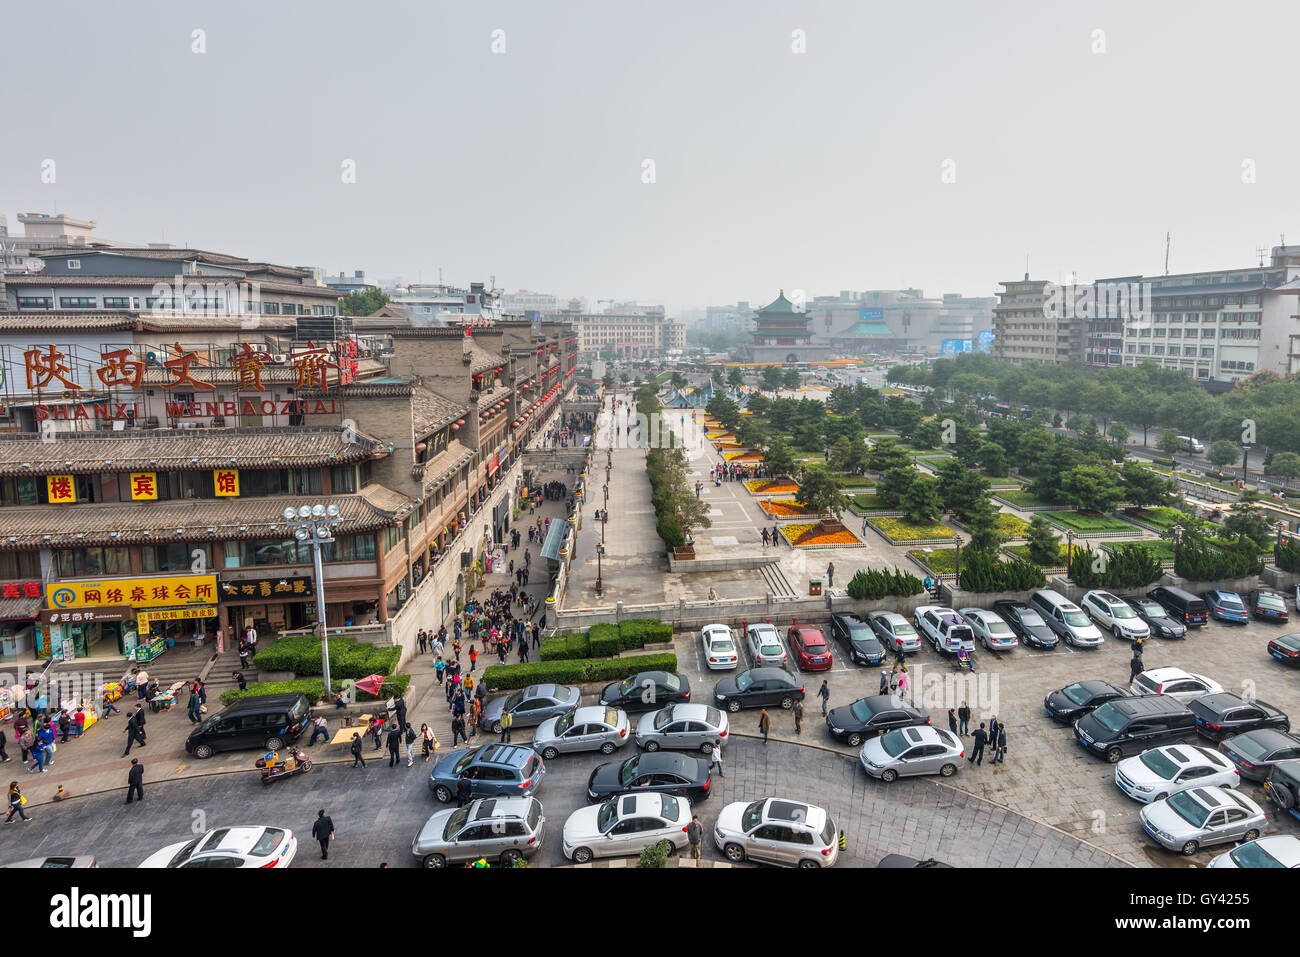 View of the square near the Bell Tower in Xian, Shaanxi Province, China. Stock Photo